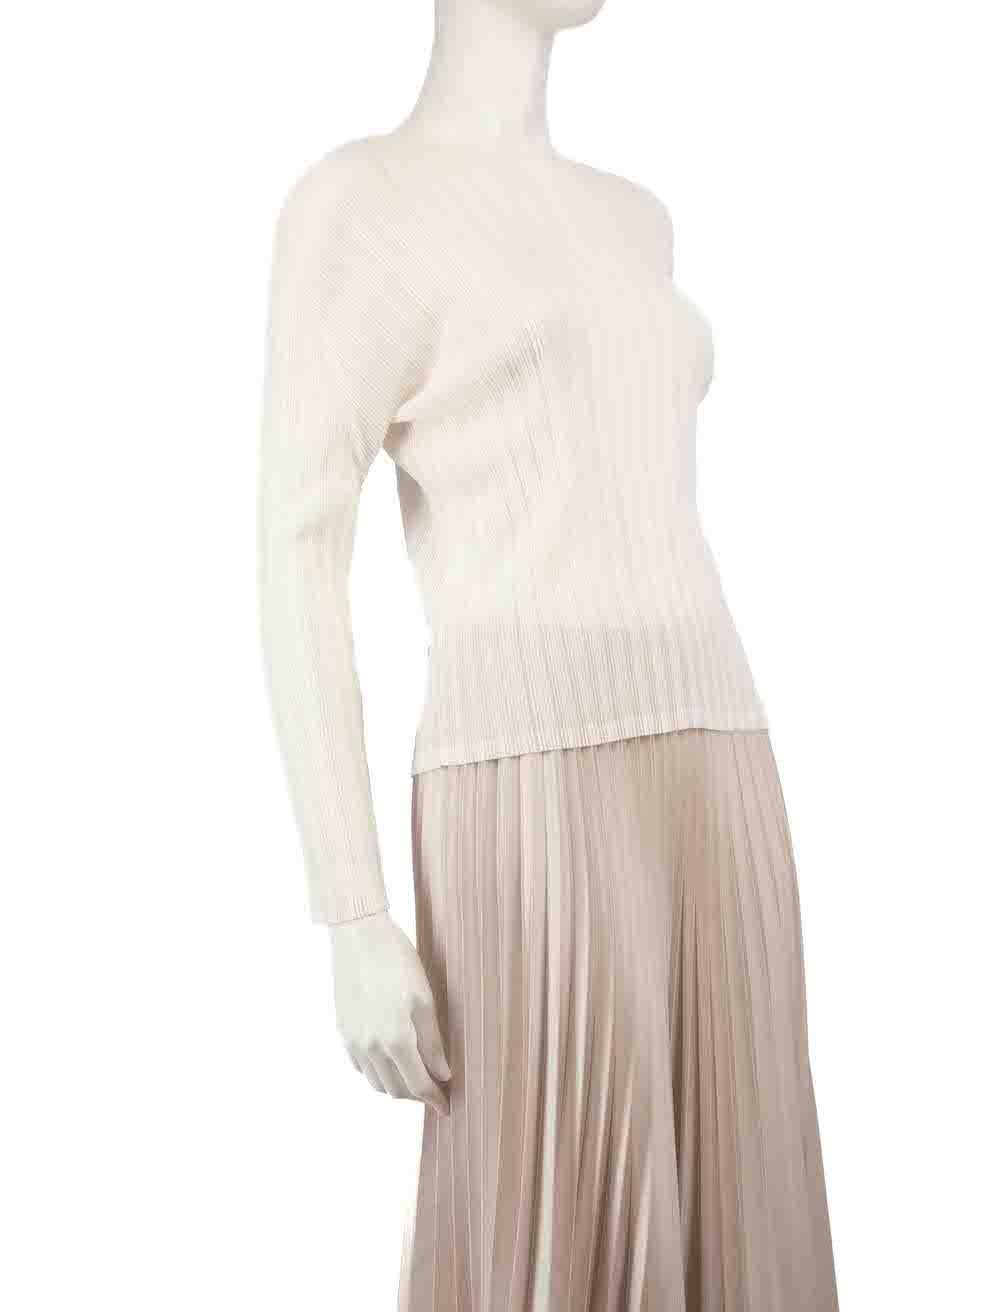 CONDITION is Never worn. No visible wear to top is evident on this new Pleats Please by Issey Miyake designer resale item. Please note that the composition label is written in Japanese.
 
 
 
 Details
 
 
 Cream
 
 Polyester
 
 Long sleeves top
 
